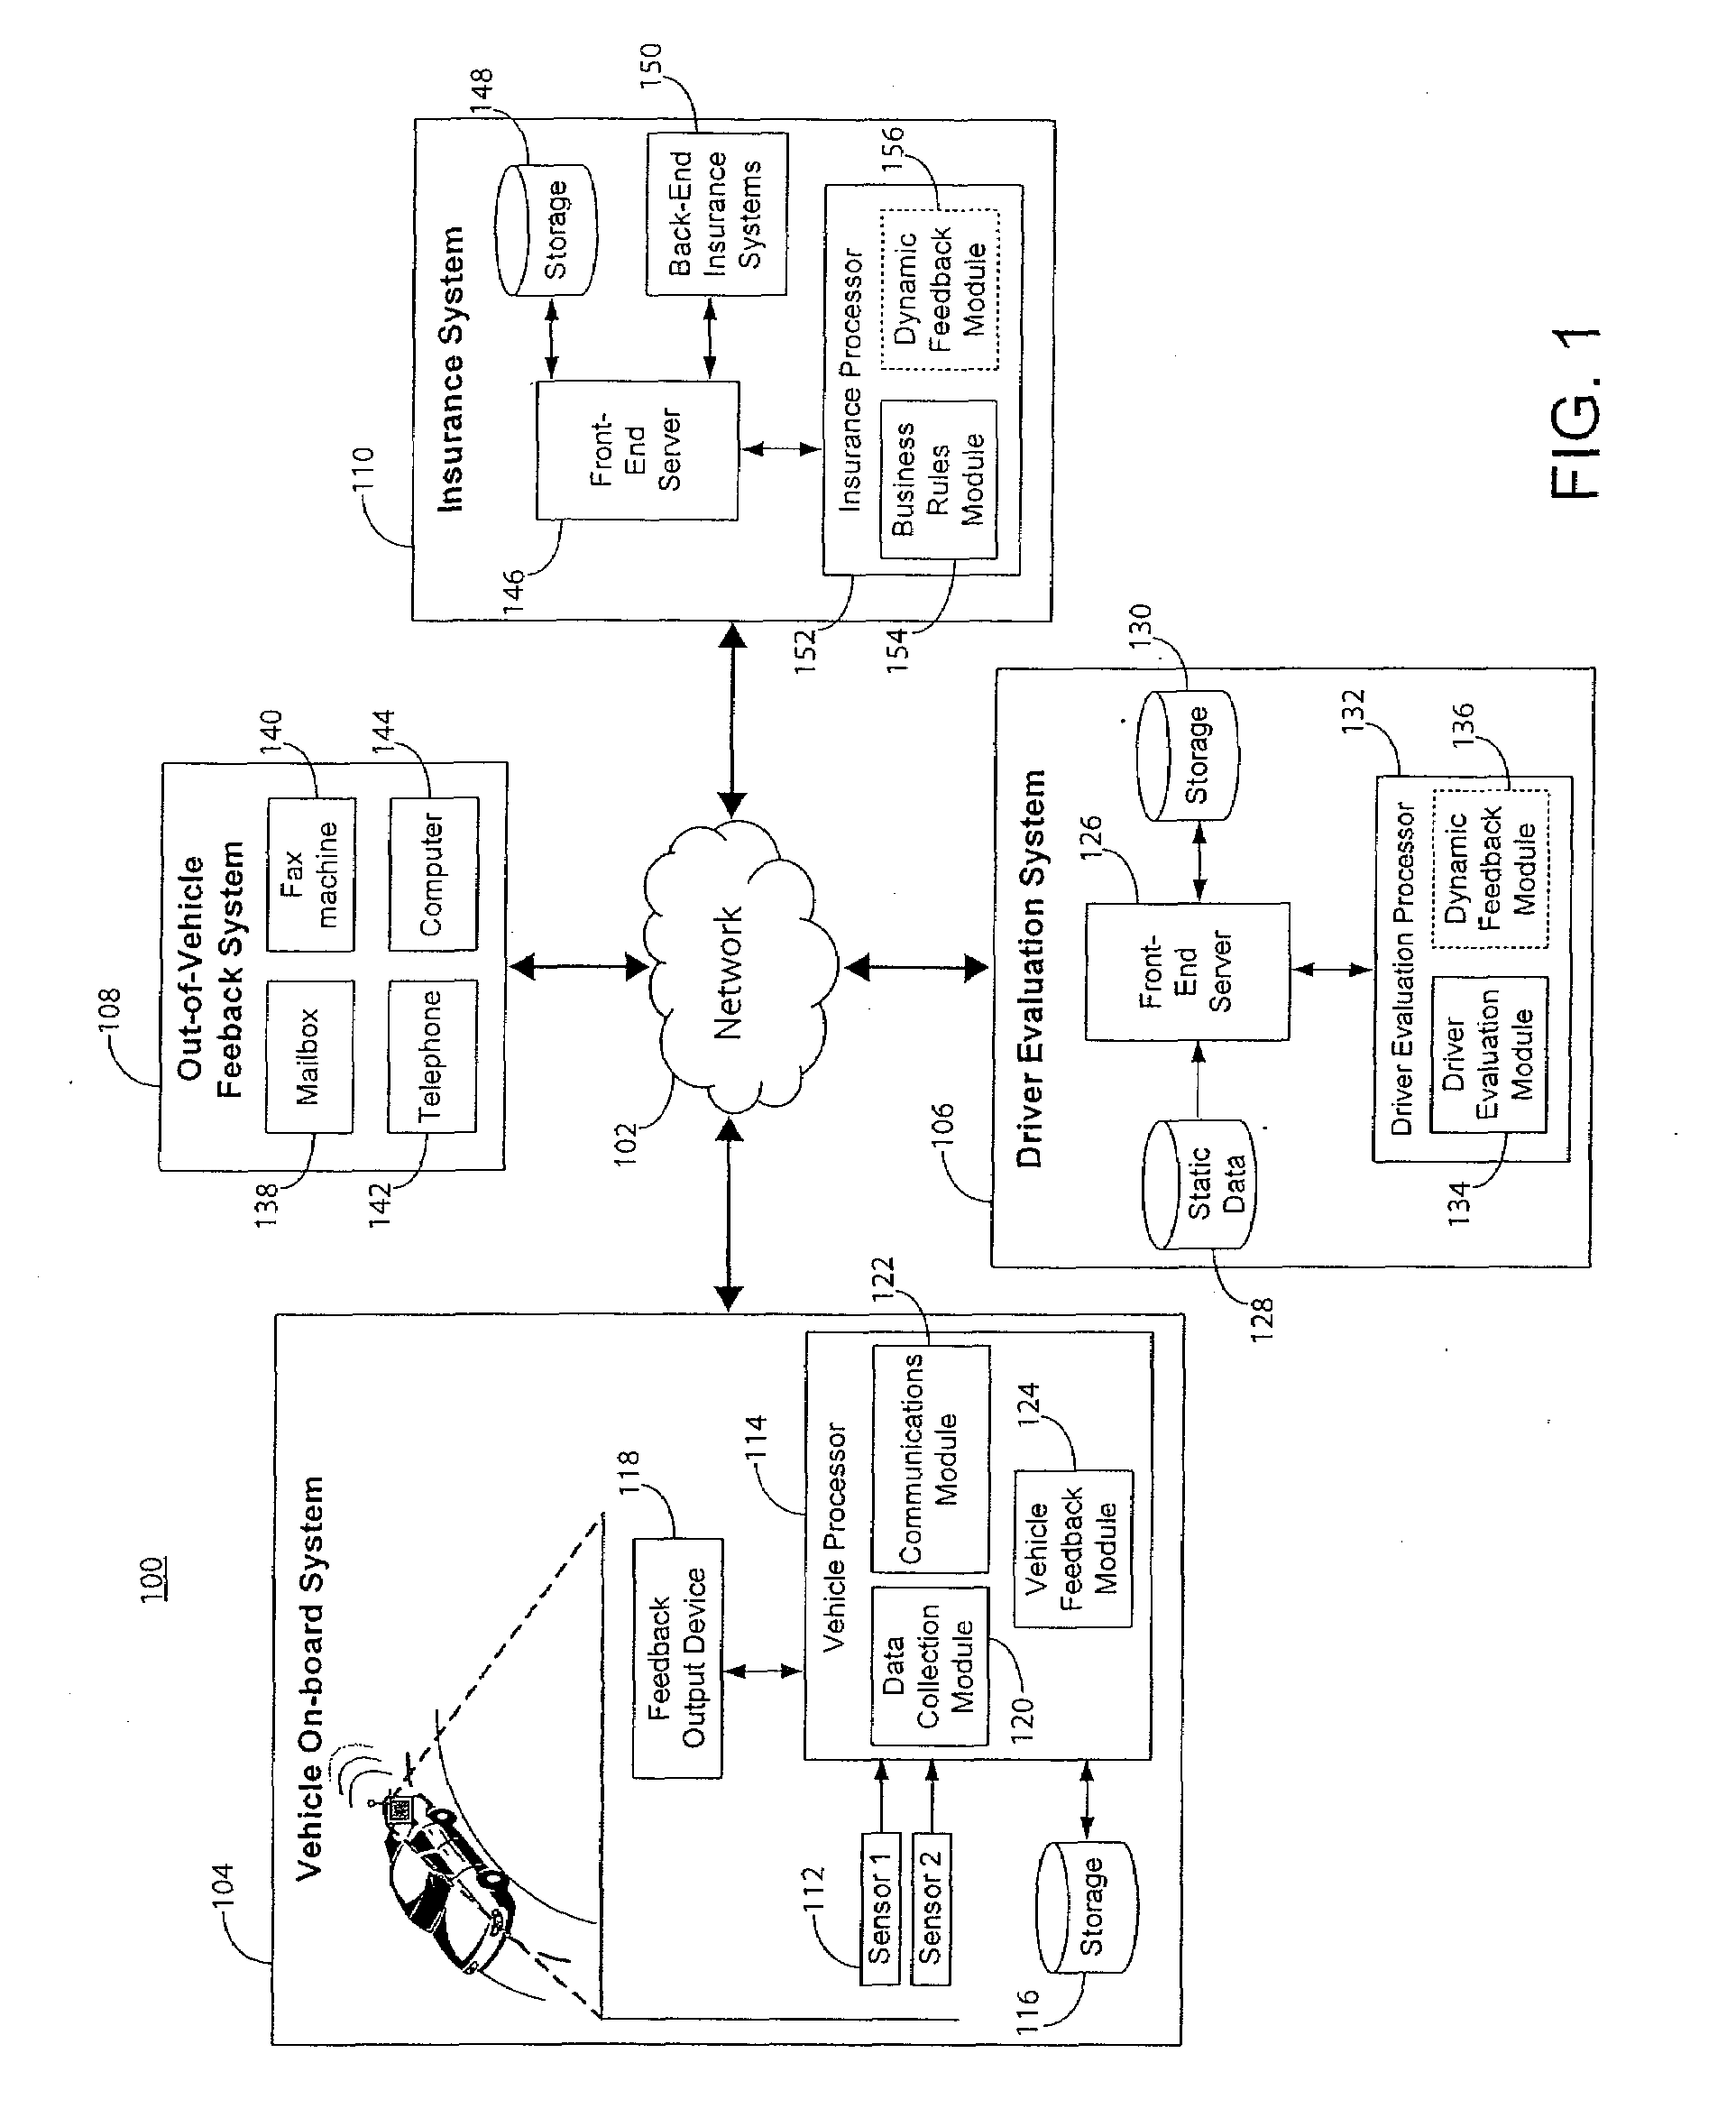 System and method for providing customized safety feedback